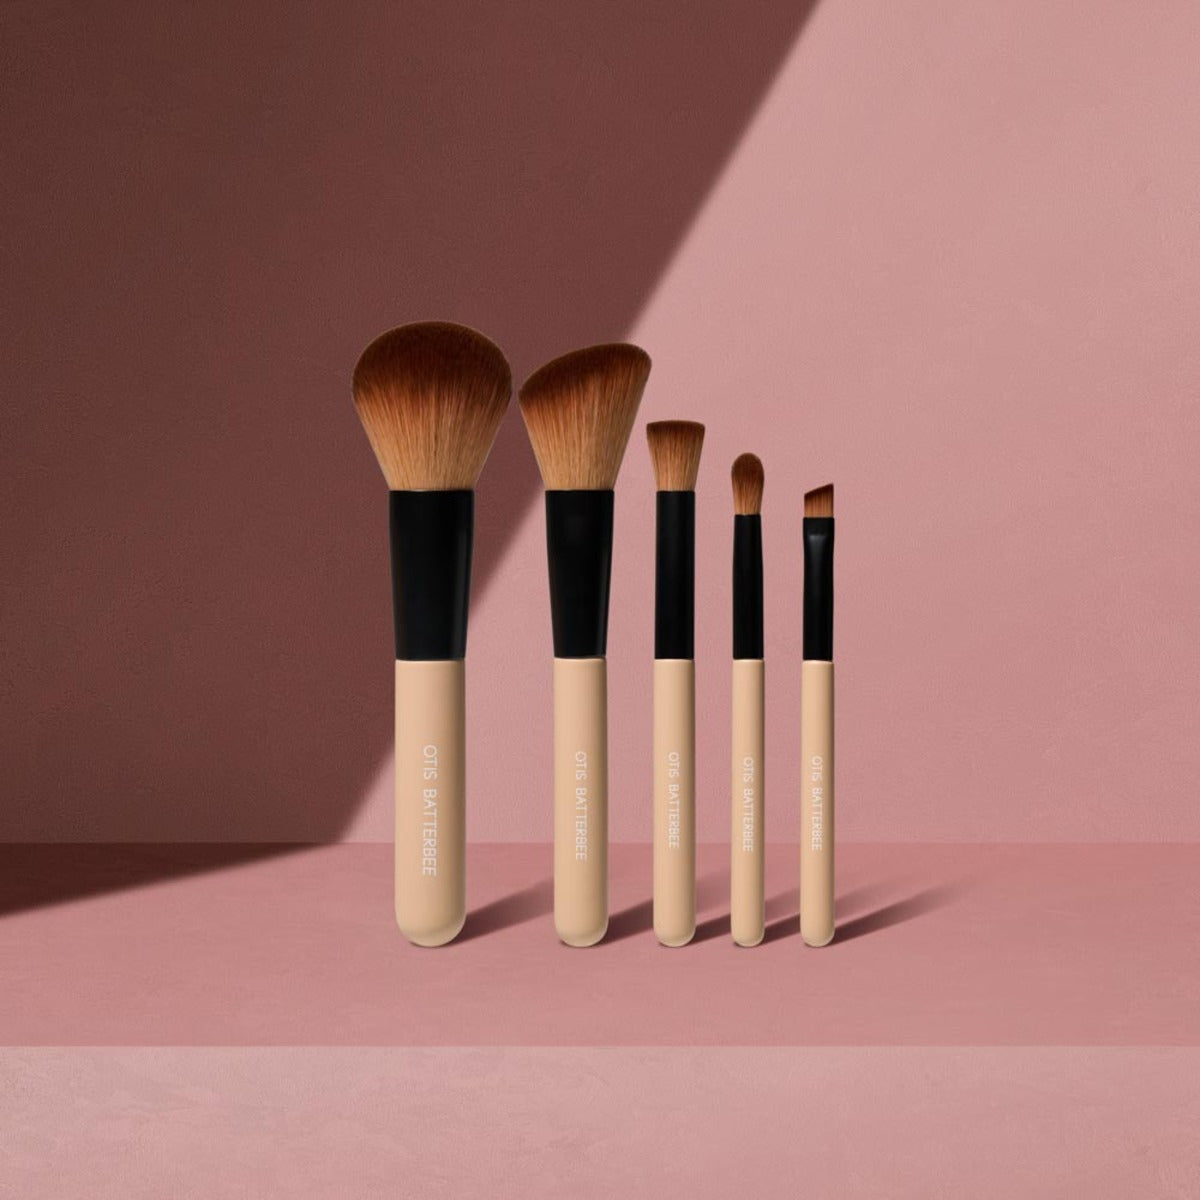 Otis Batterbee Mini Face Brush Set – Soft cashmere bristles blend products for a flawless finish.